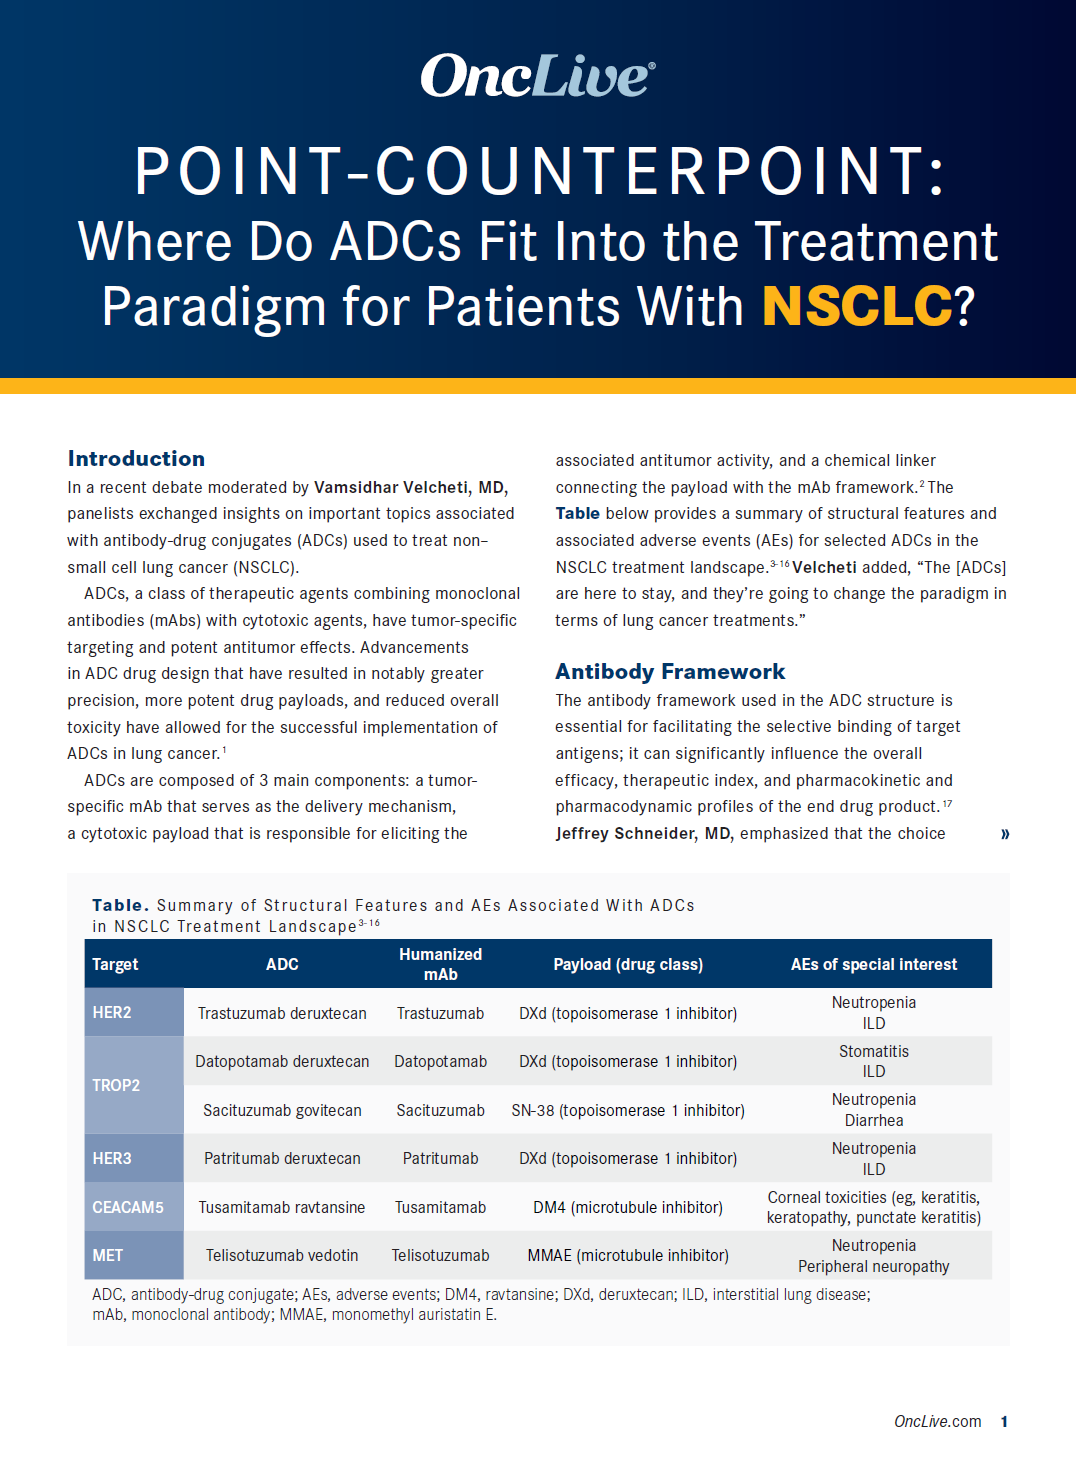 Where Do ADCs Fit Into the Treatment Paradigm for Patients With NSCLC?